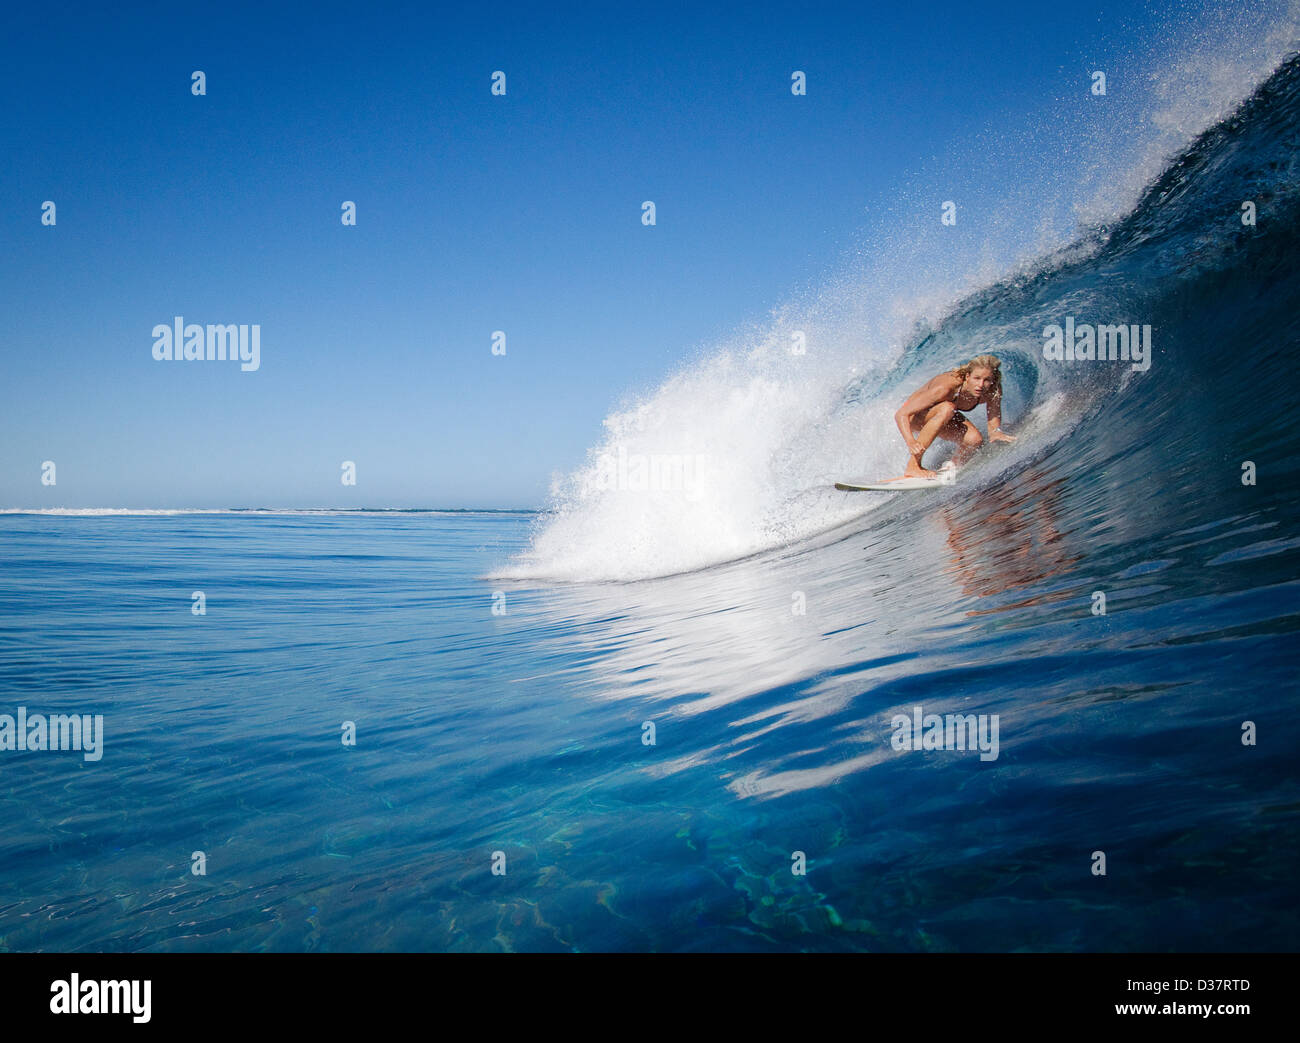 Woman surfing in crest of wave Stock Photo